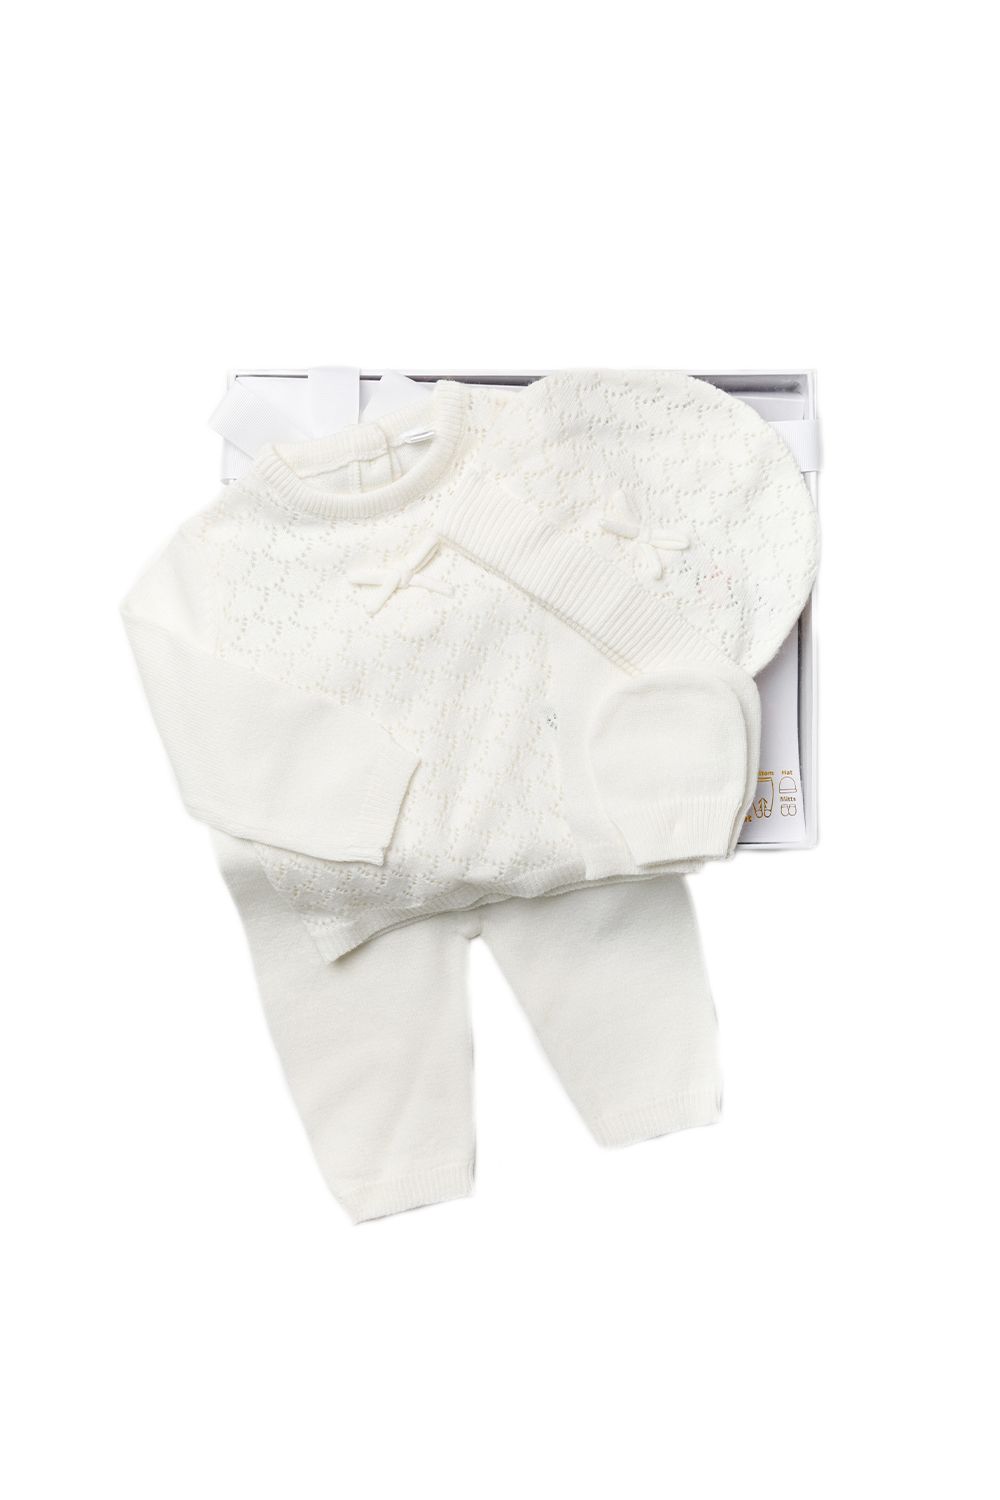 This Rock A Bye Baby Boutique four-piece set features a knitted jumper, bottoms, a hat, and mitts. The knitted cardigan has an adorable bow motif, matching the hat. The trousers are matching, with an elasticated waistband. This piece is perfect for keeping your little one comfortable and cosy. The Rock a Bye Baby Boutique line aims to offer a specialty baby collection with adorable detailing and comes in lovely, boxed packaging, making this a lovely gift for the little one in your life.